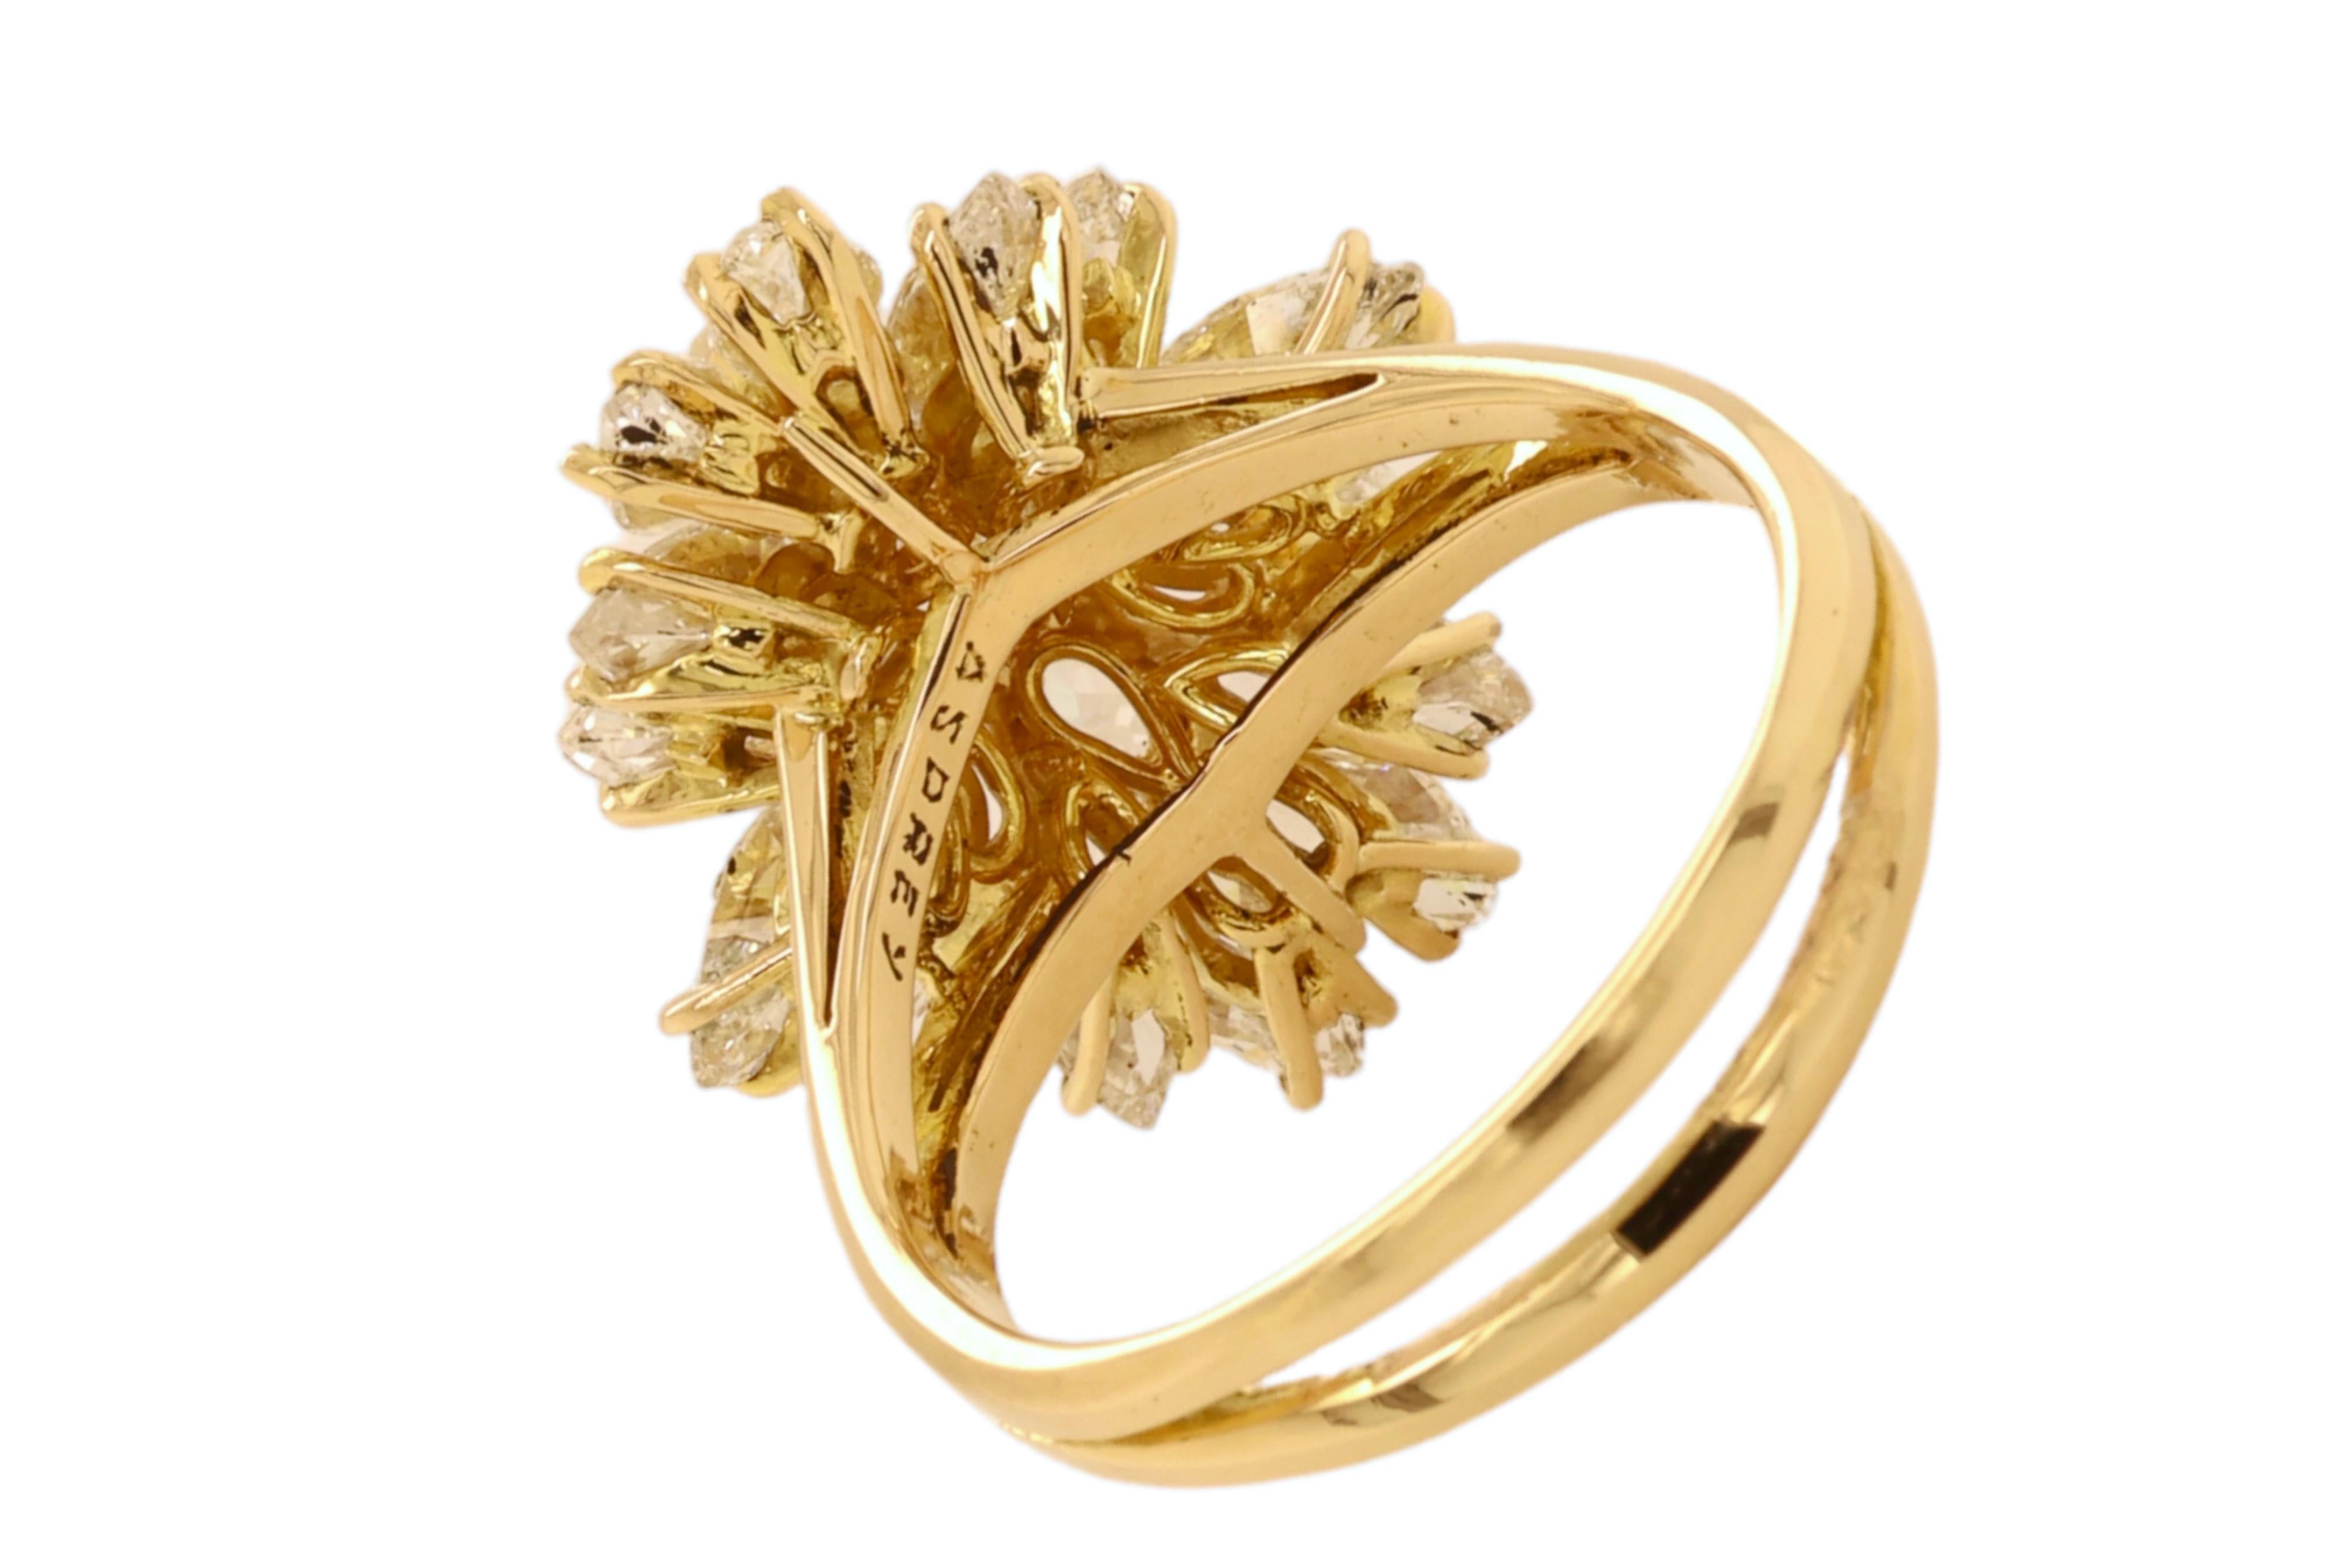 Asprey London 18kt. Yellow Gold Ring With 3.23 ct. Pear & Marquise Cut Diamonds For Sale 2